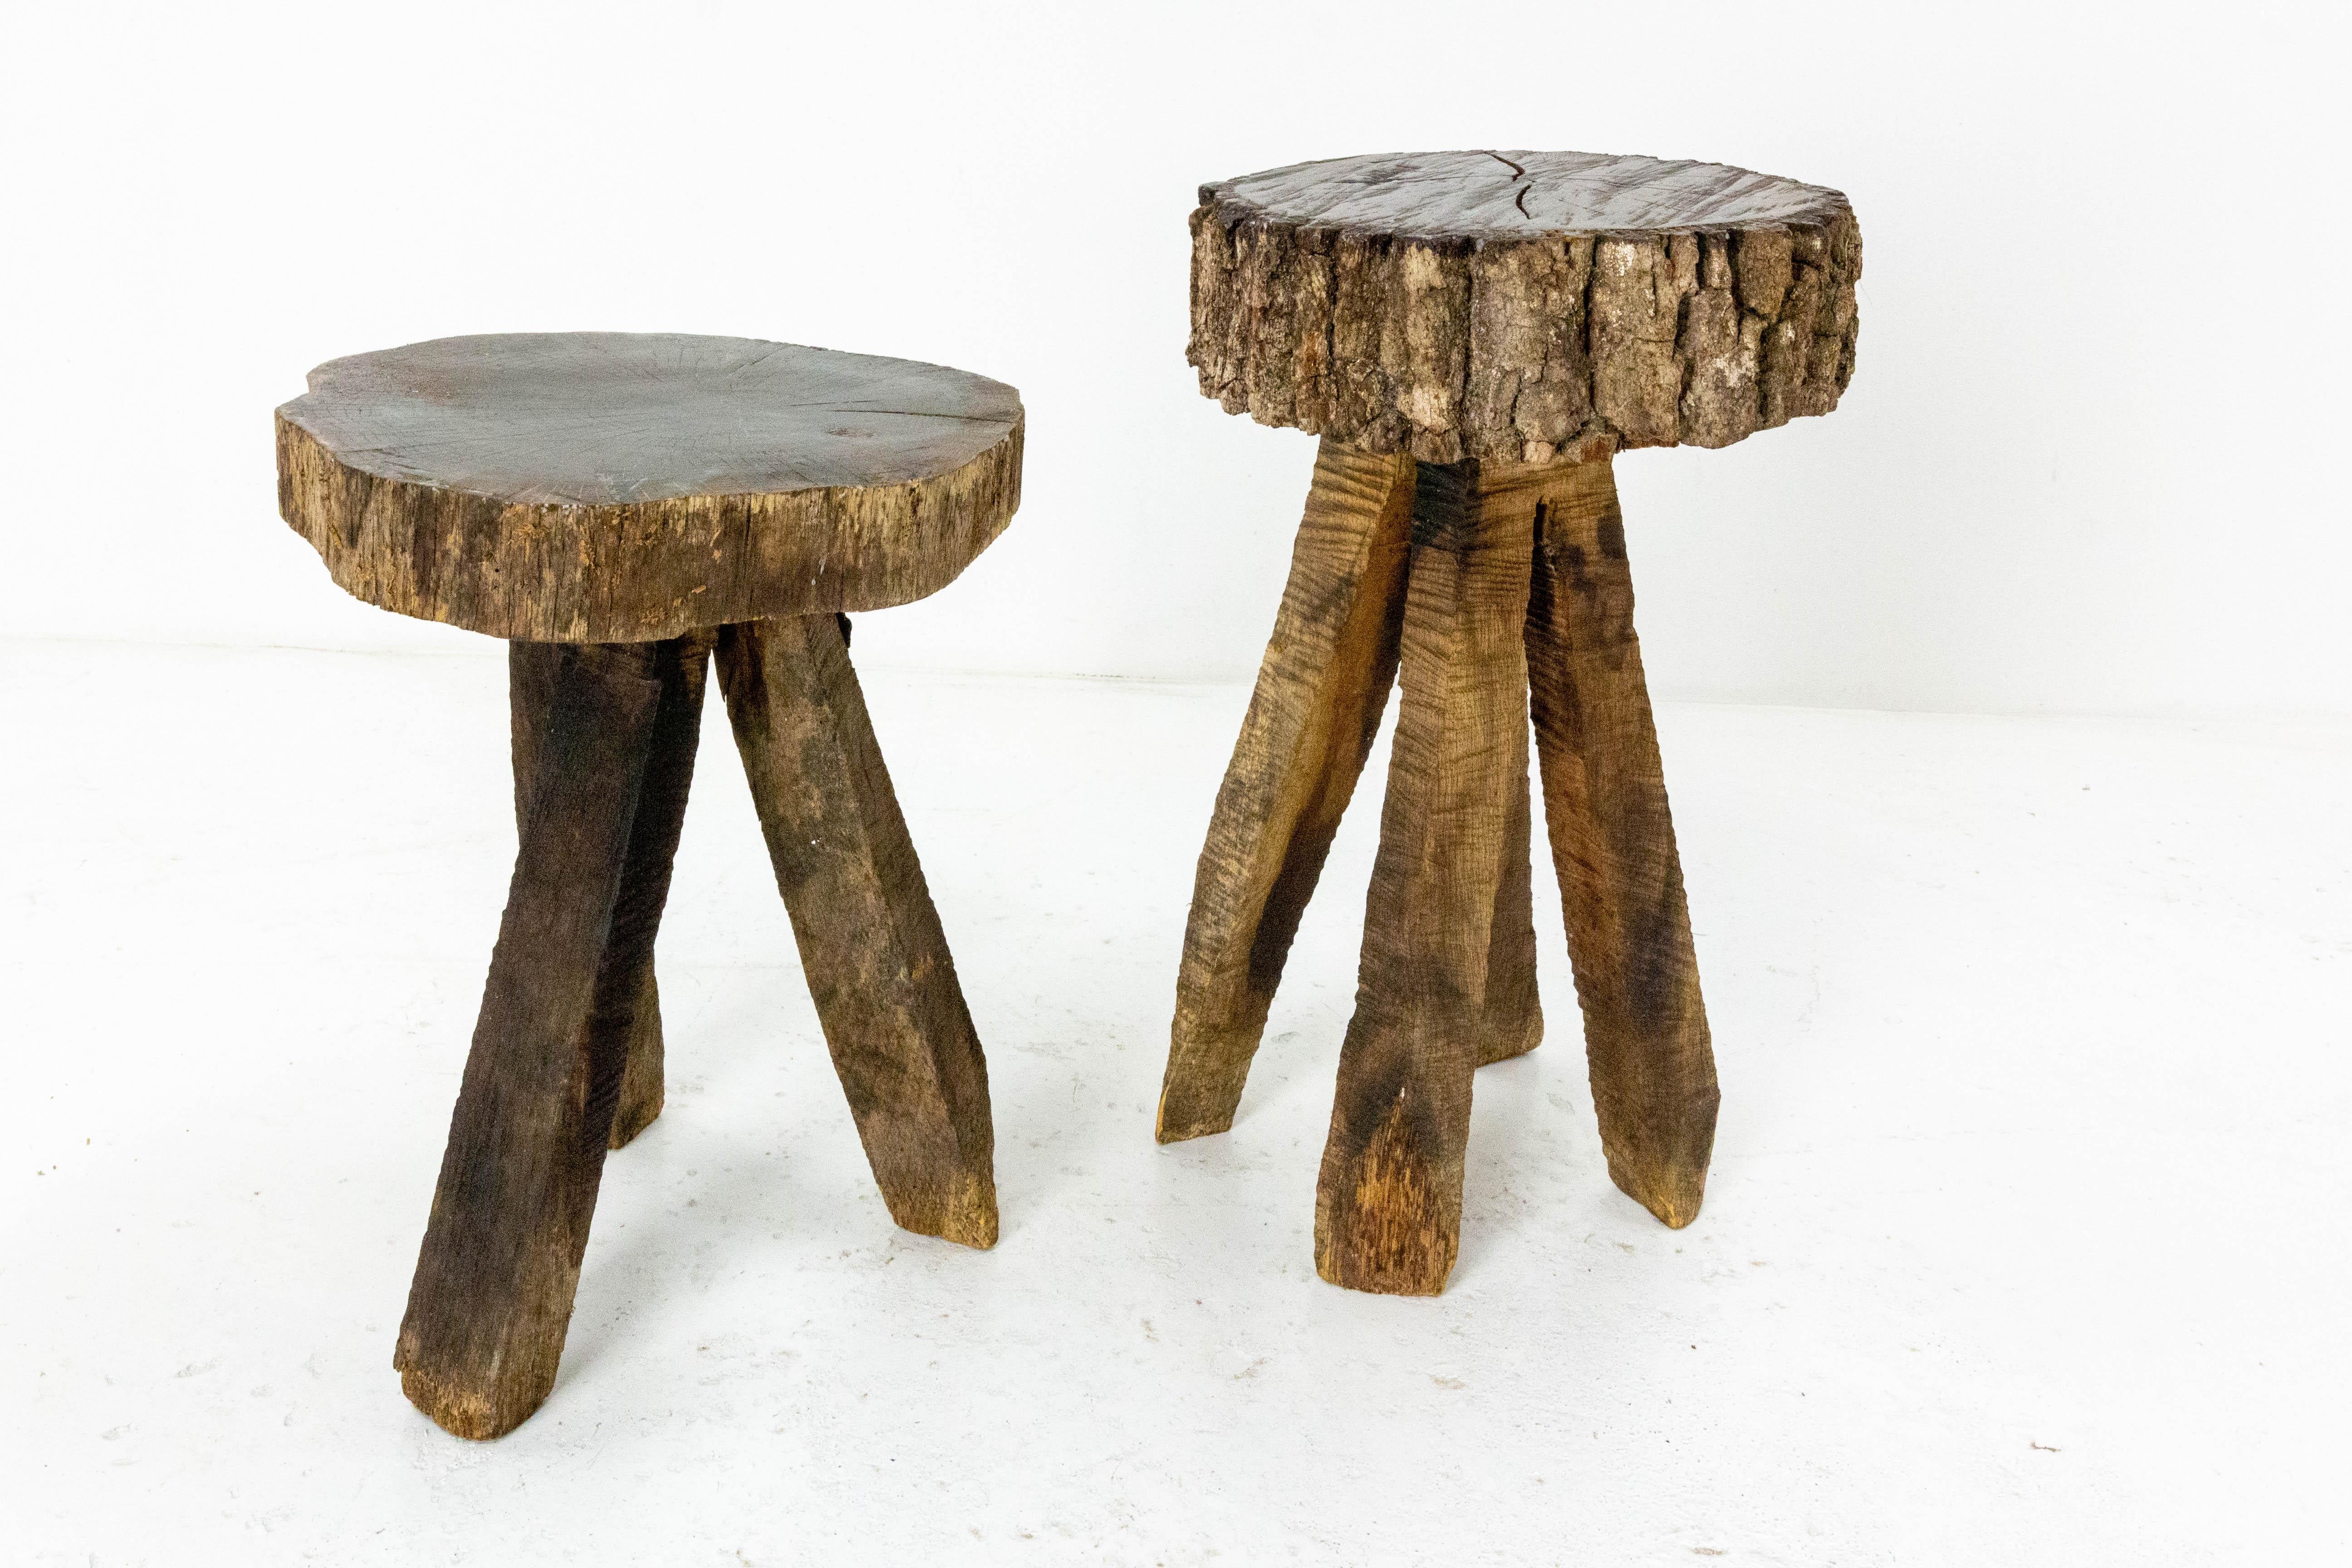 French pair of side table in the brutalist style. They can also be used as nightstand bedside tables or plant holders.
Dimensions: 
three legs sellette D 11.81 in. ( 30 cm) W 12.60 in. (32 cm) H 15.75 in. (40 cm)
four legs sellette D 12.20 in. (